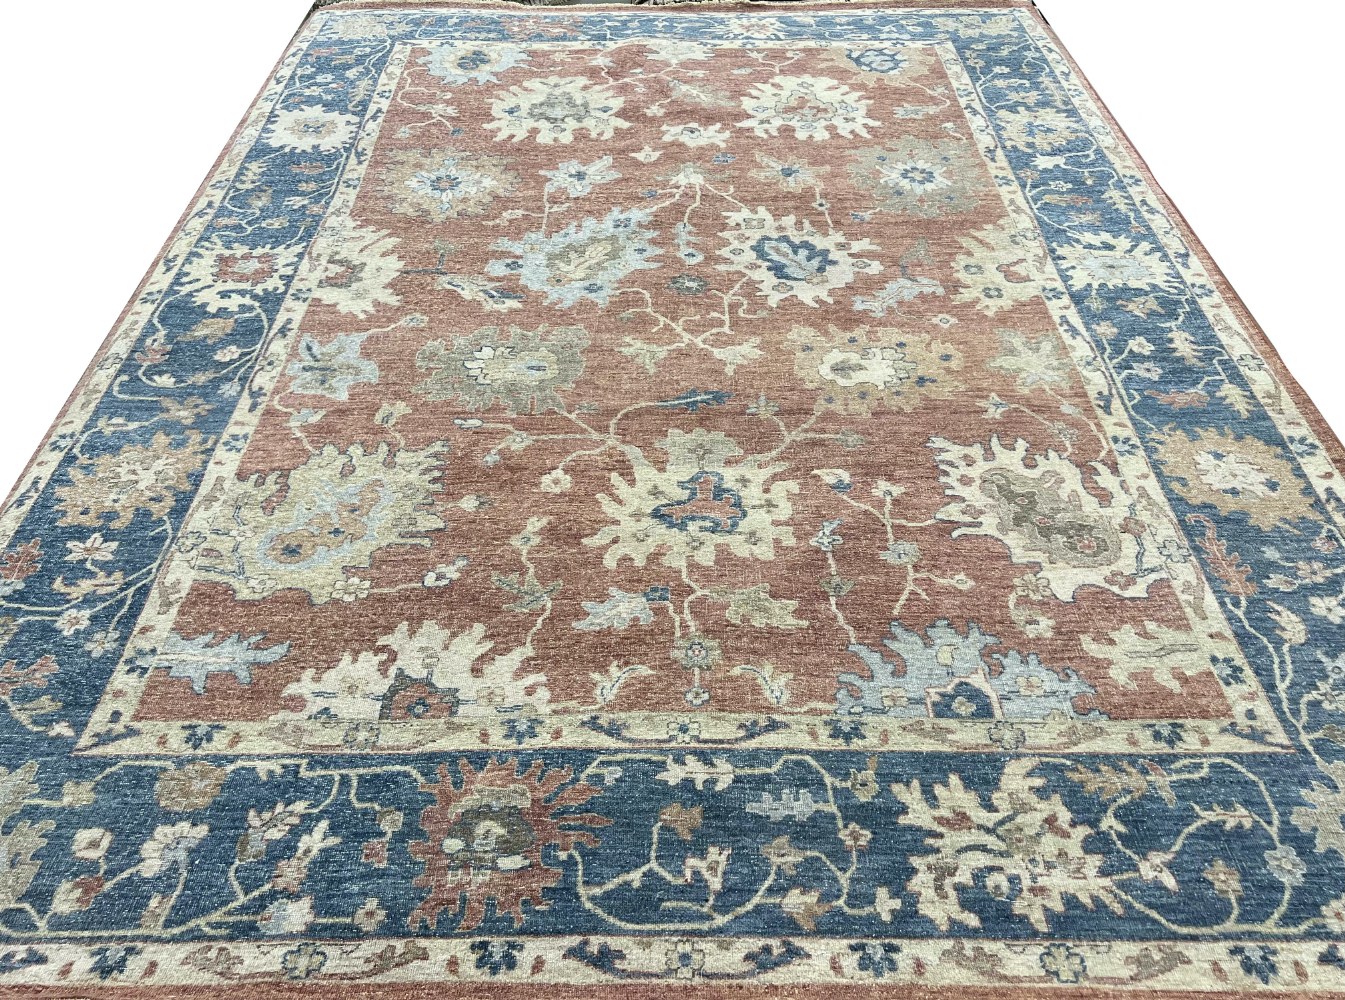 9x12 Aryana & Antique Revivals Hand Knotted Wool Area Rug - MR028039